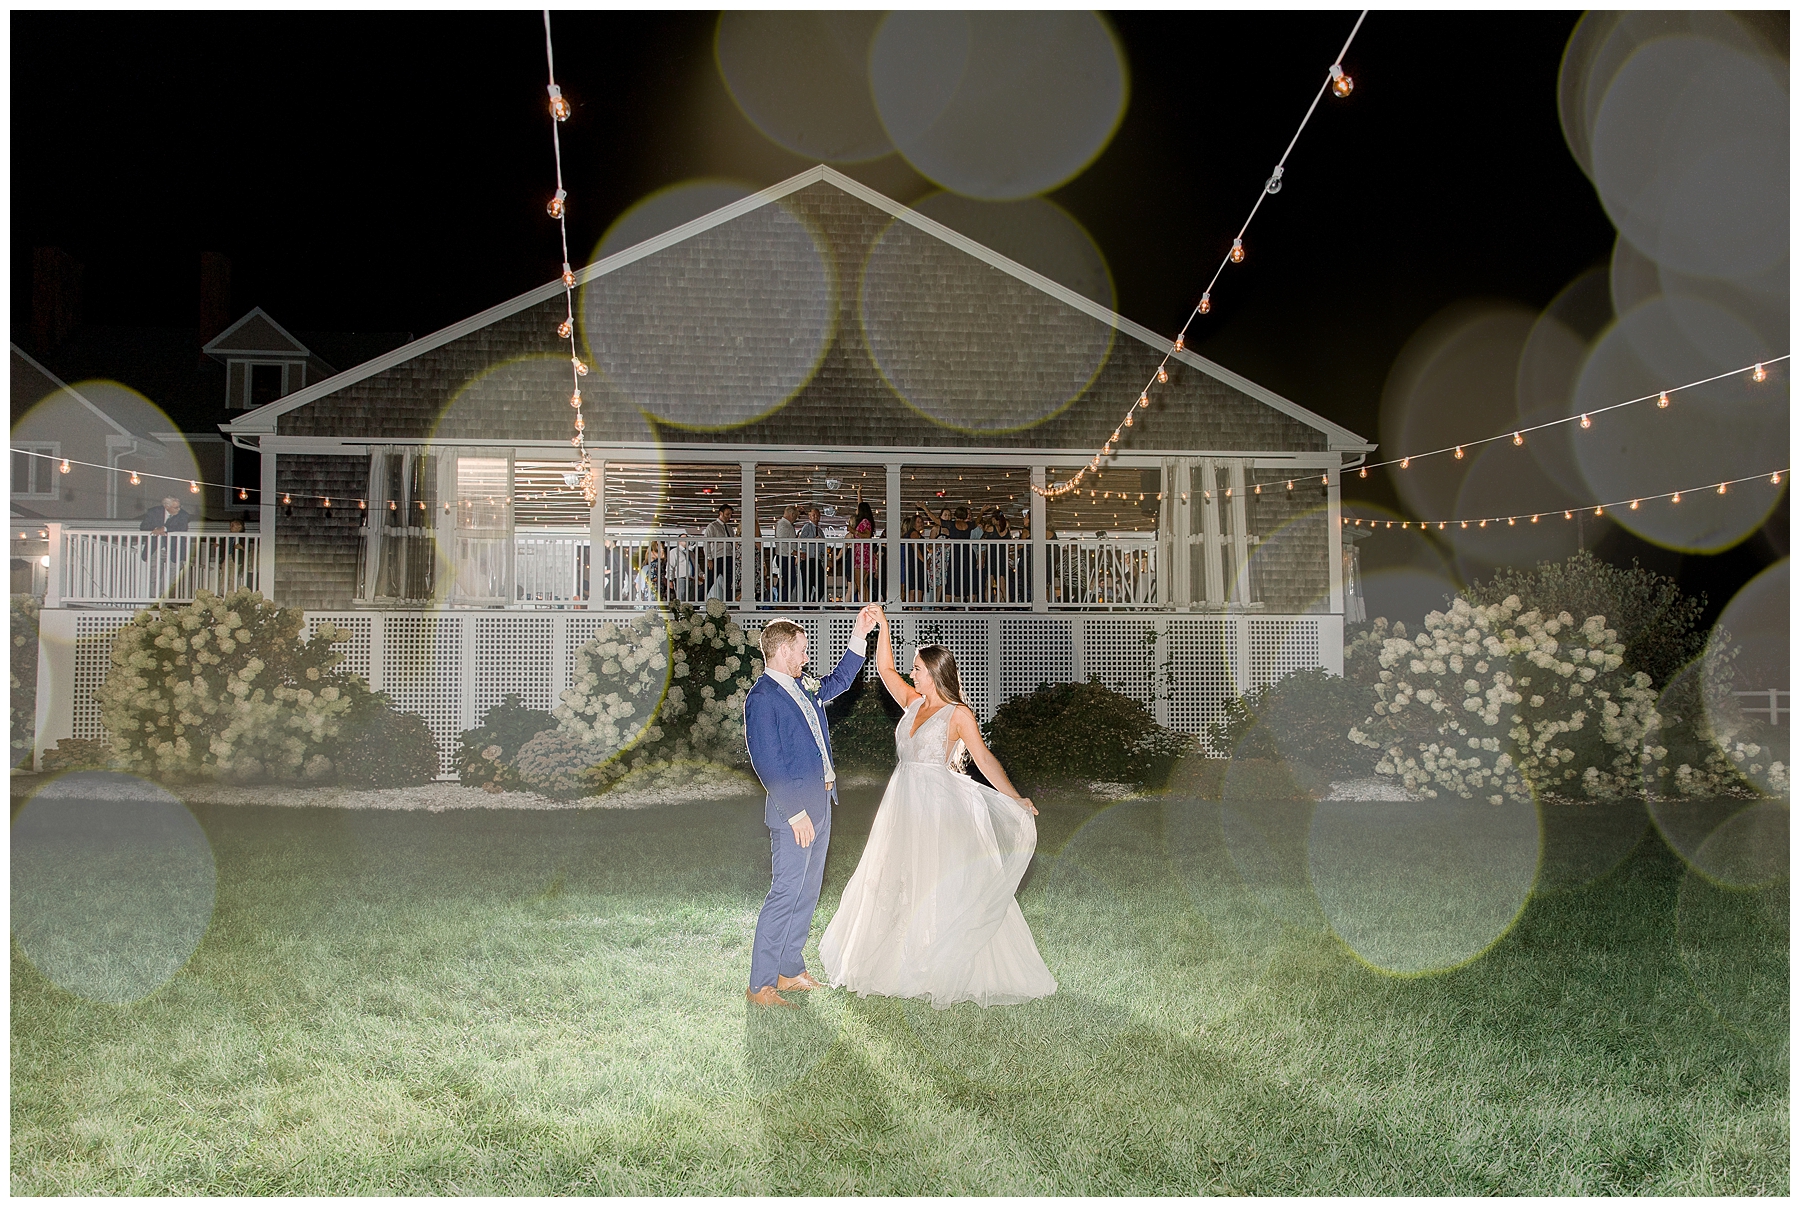 Epic wedding photos from end of night at Shining Tides Wedding